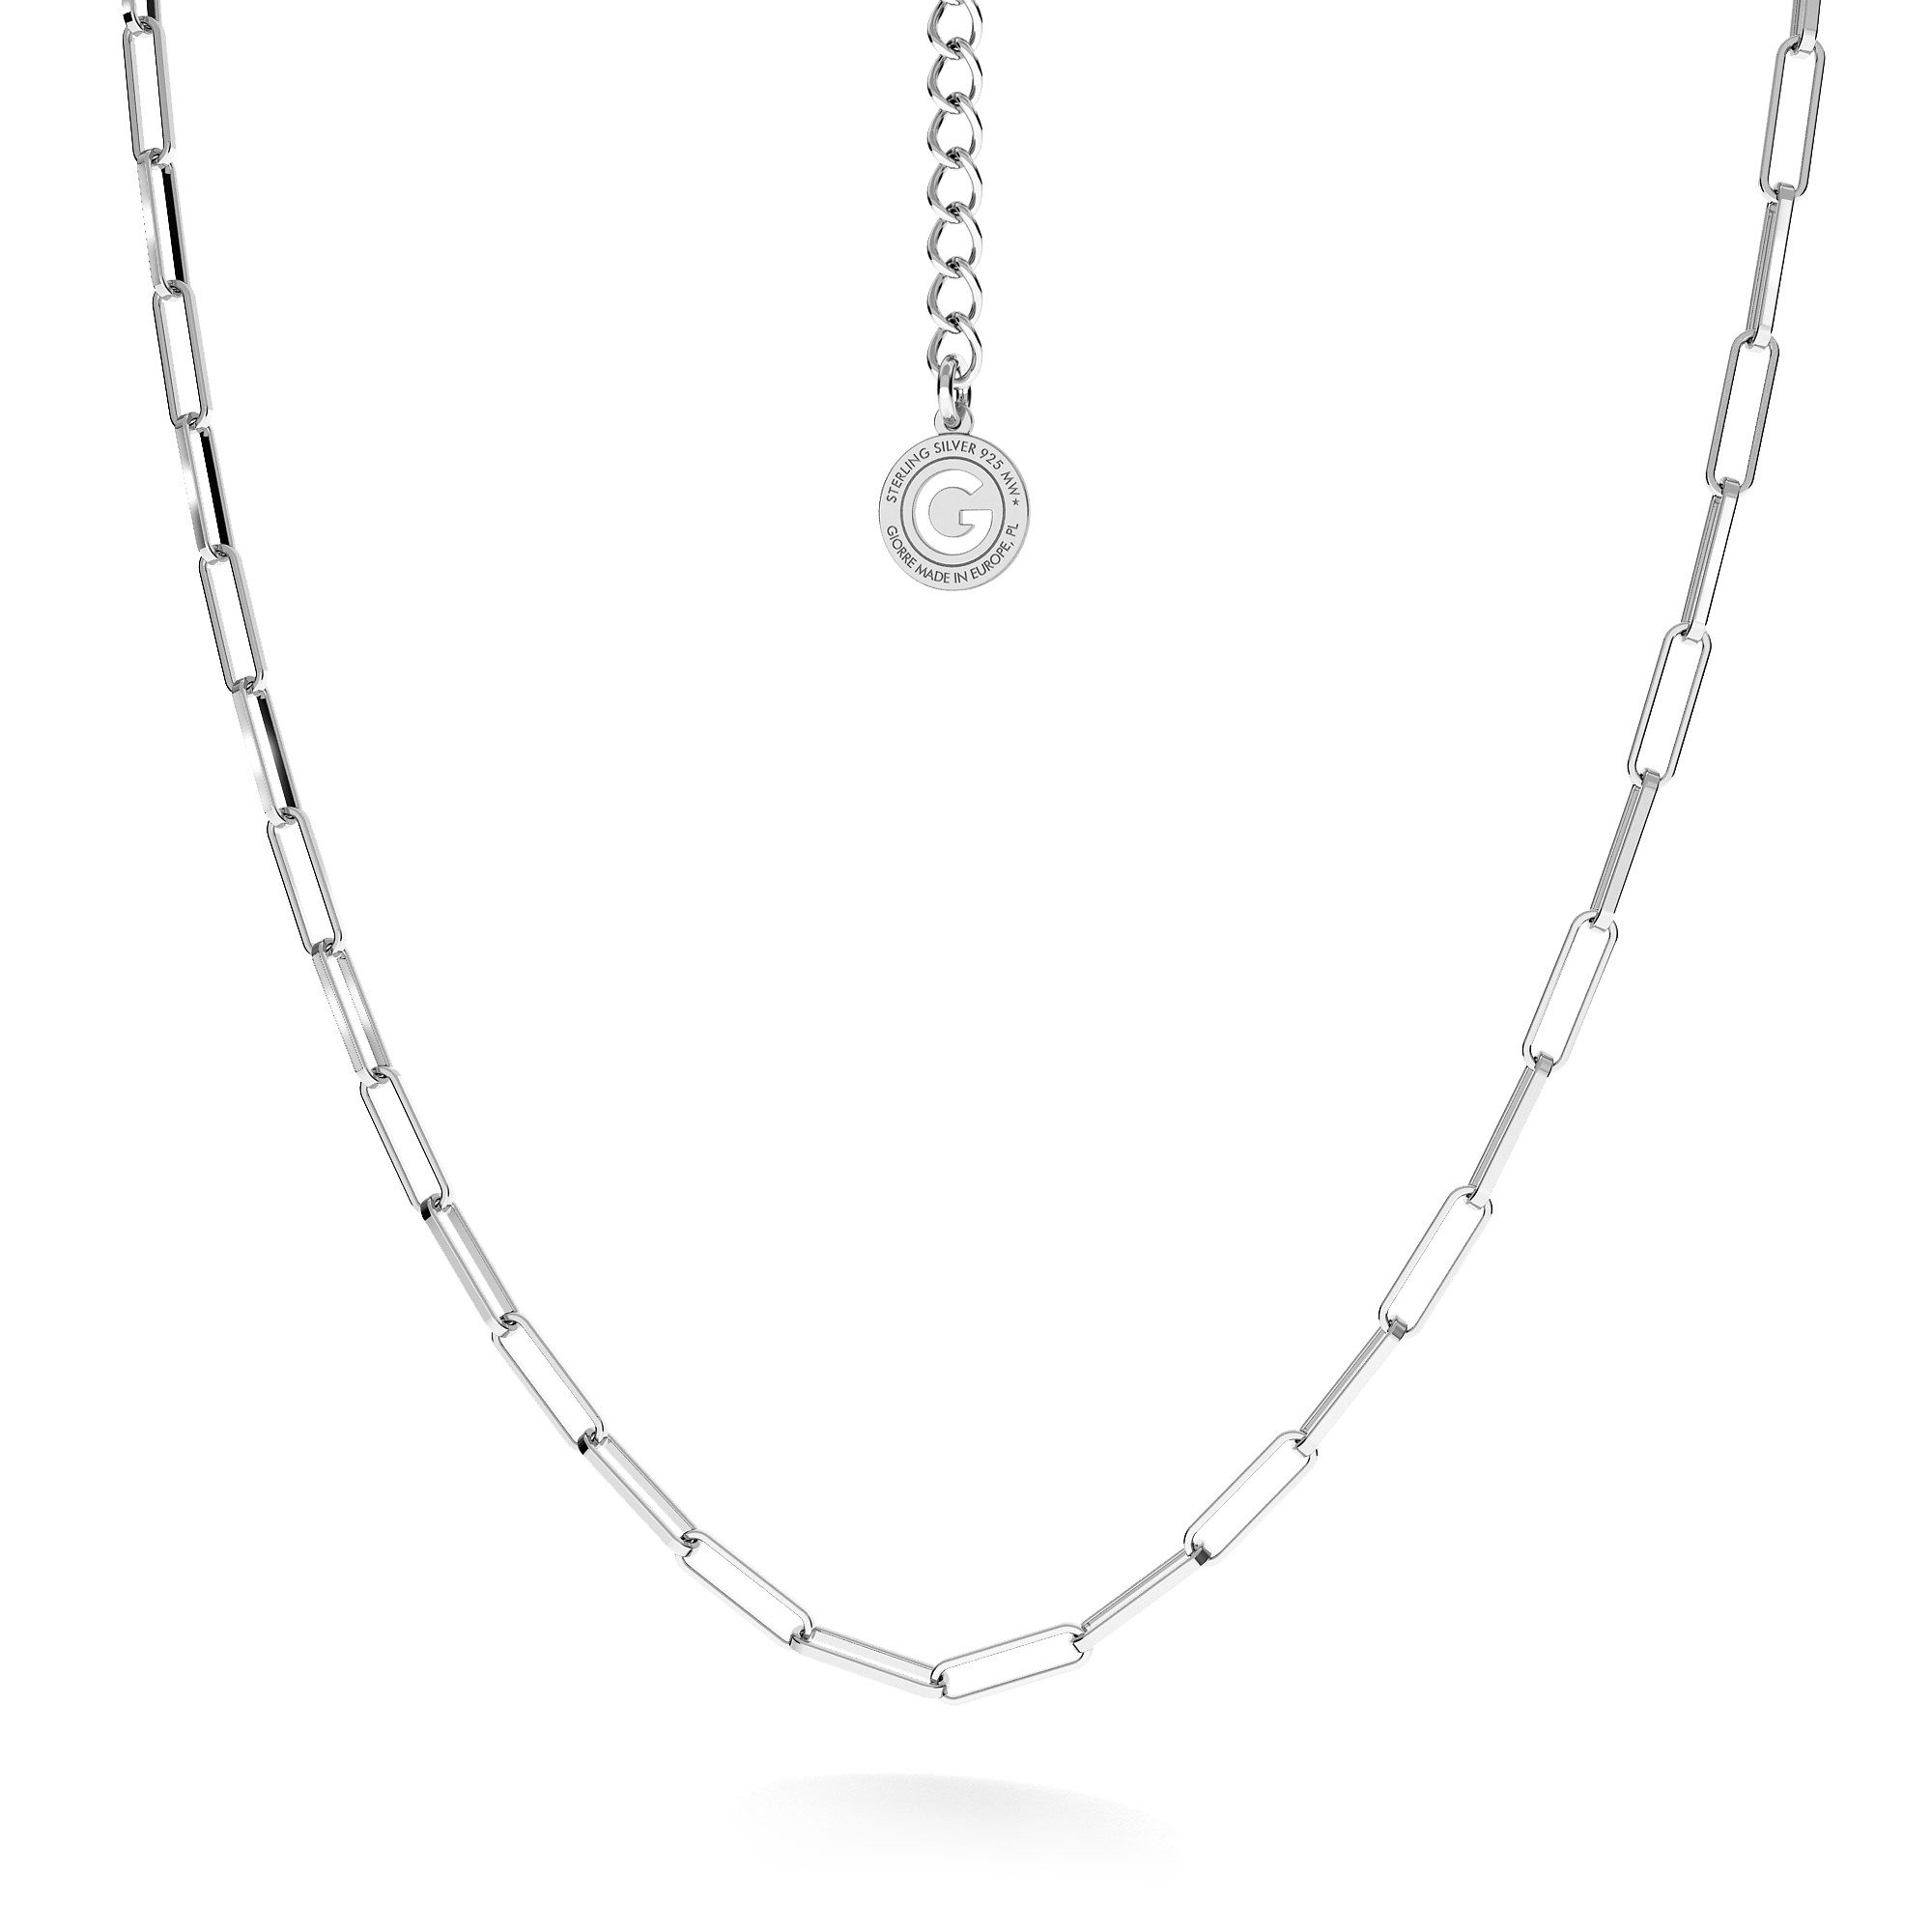 Giorre Woman's Necklace 34807